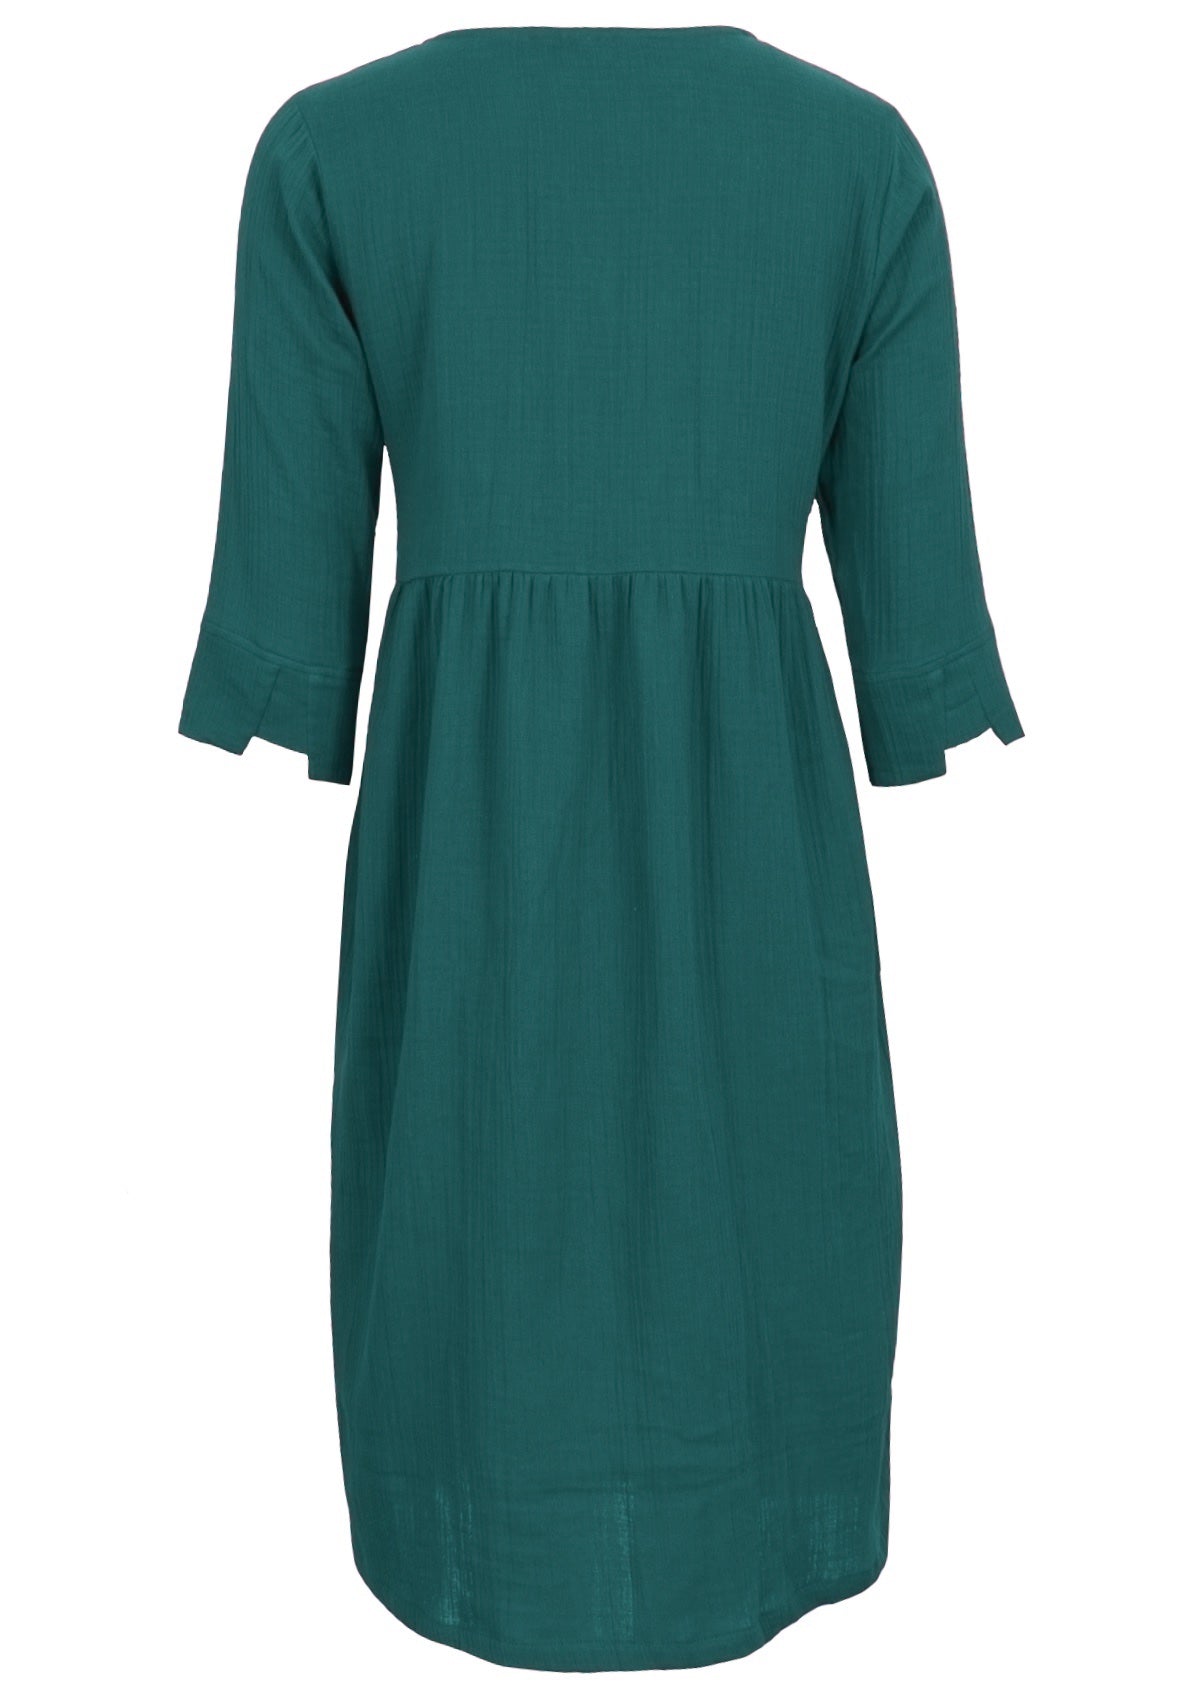 Deep teal double cotton dress with detailed cuffs